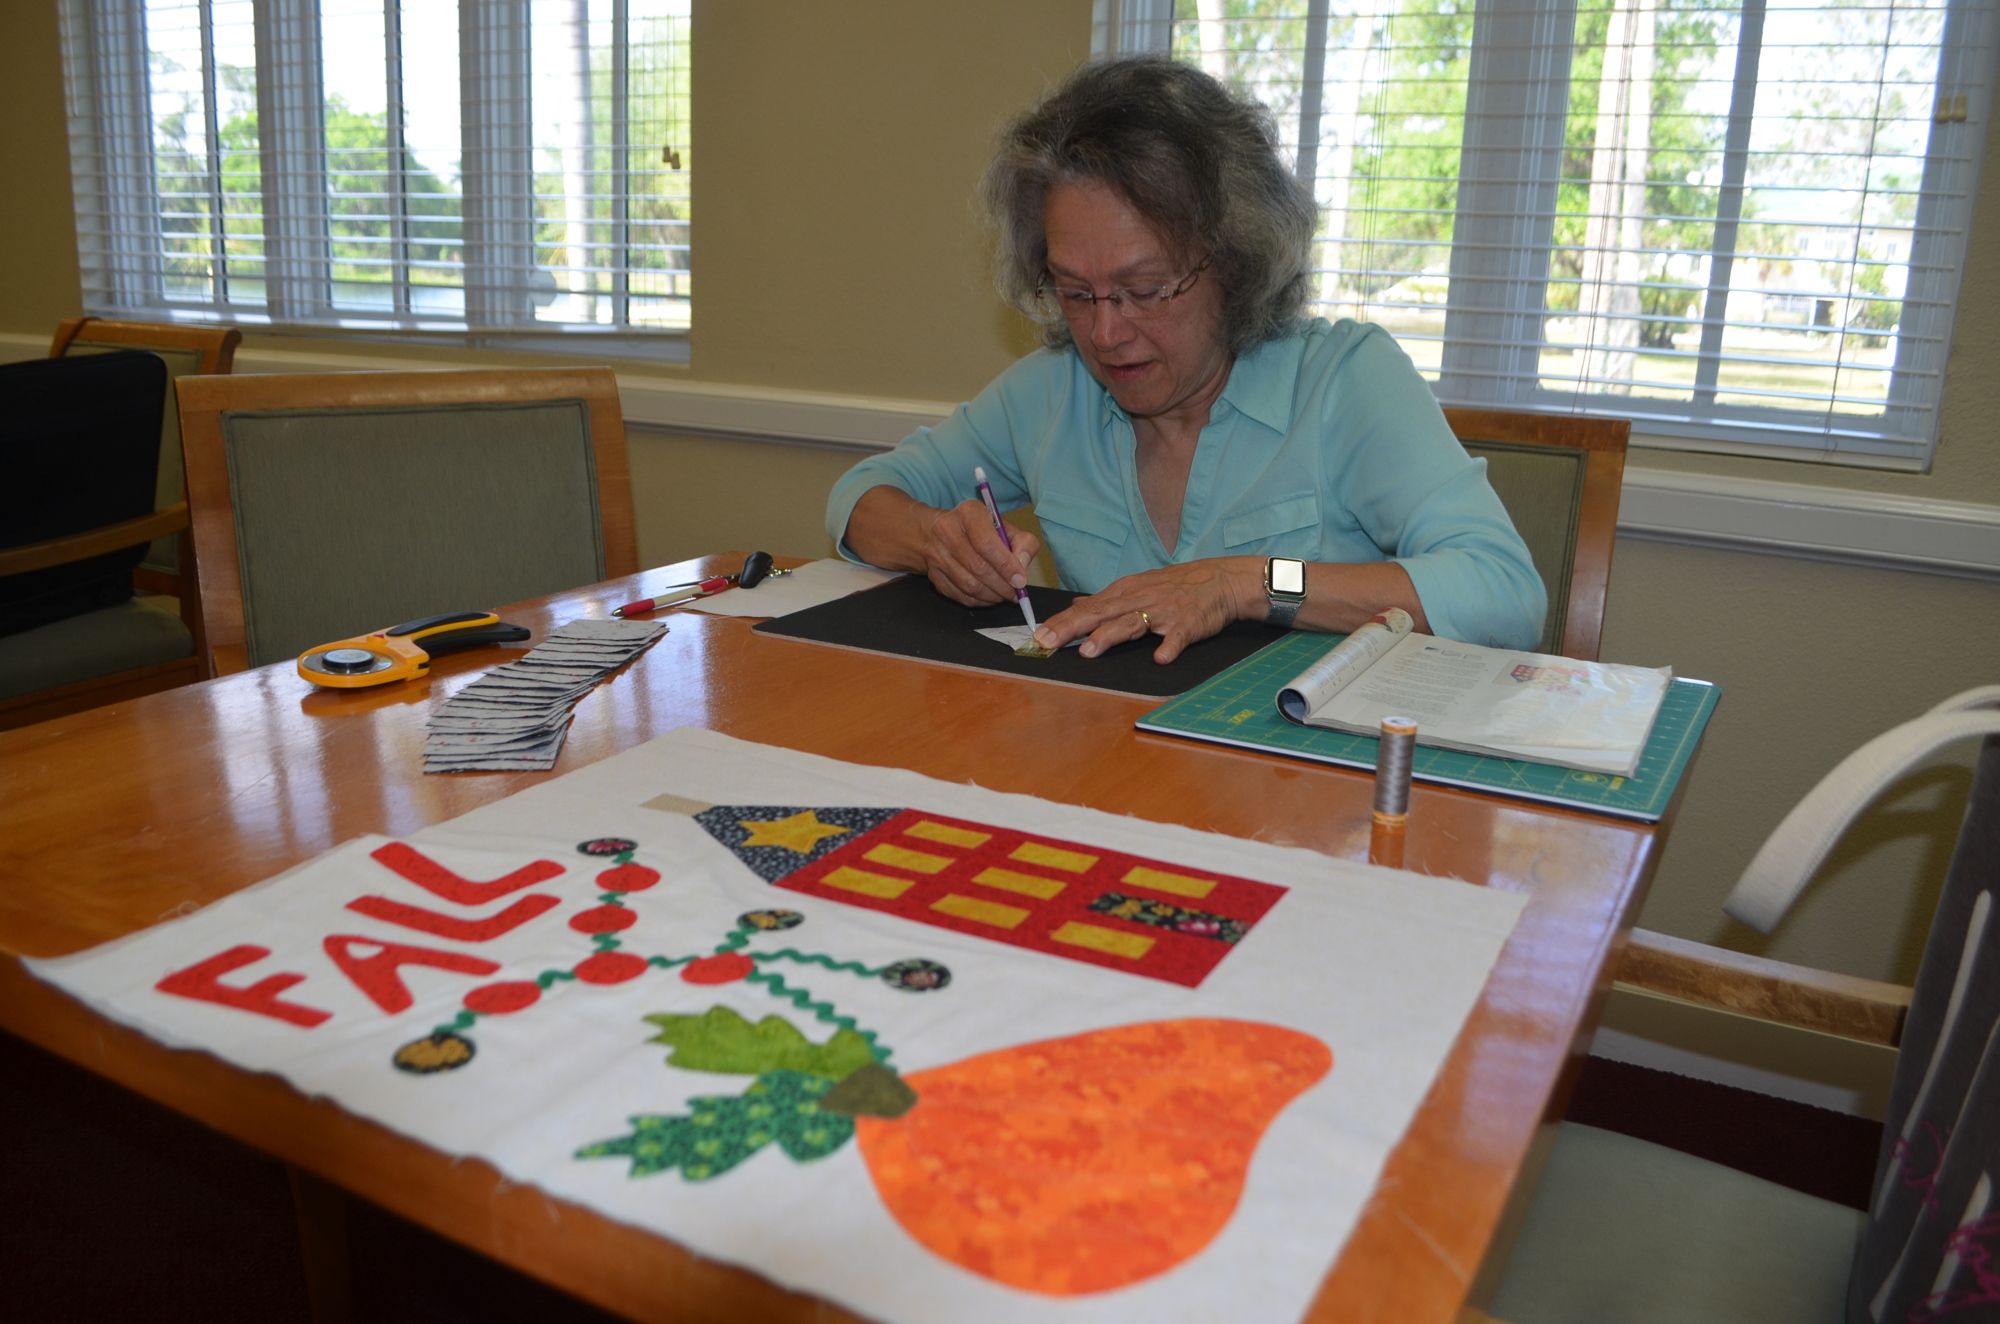 Mary Jane Diaz may be a beginner, but she already knows how to measure out and carefully create her quilt.